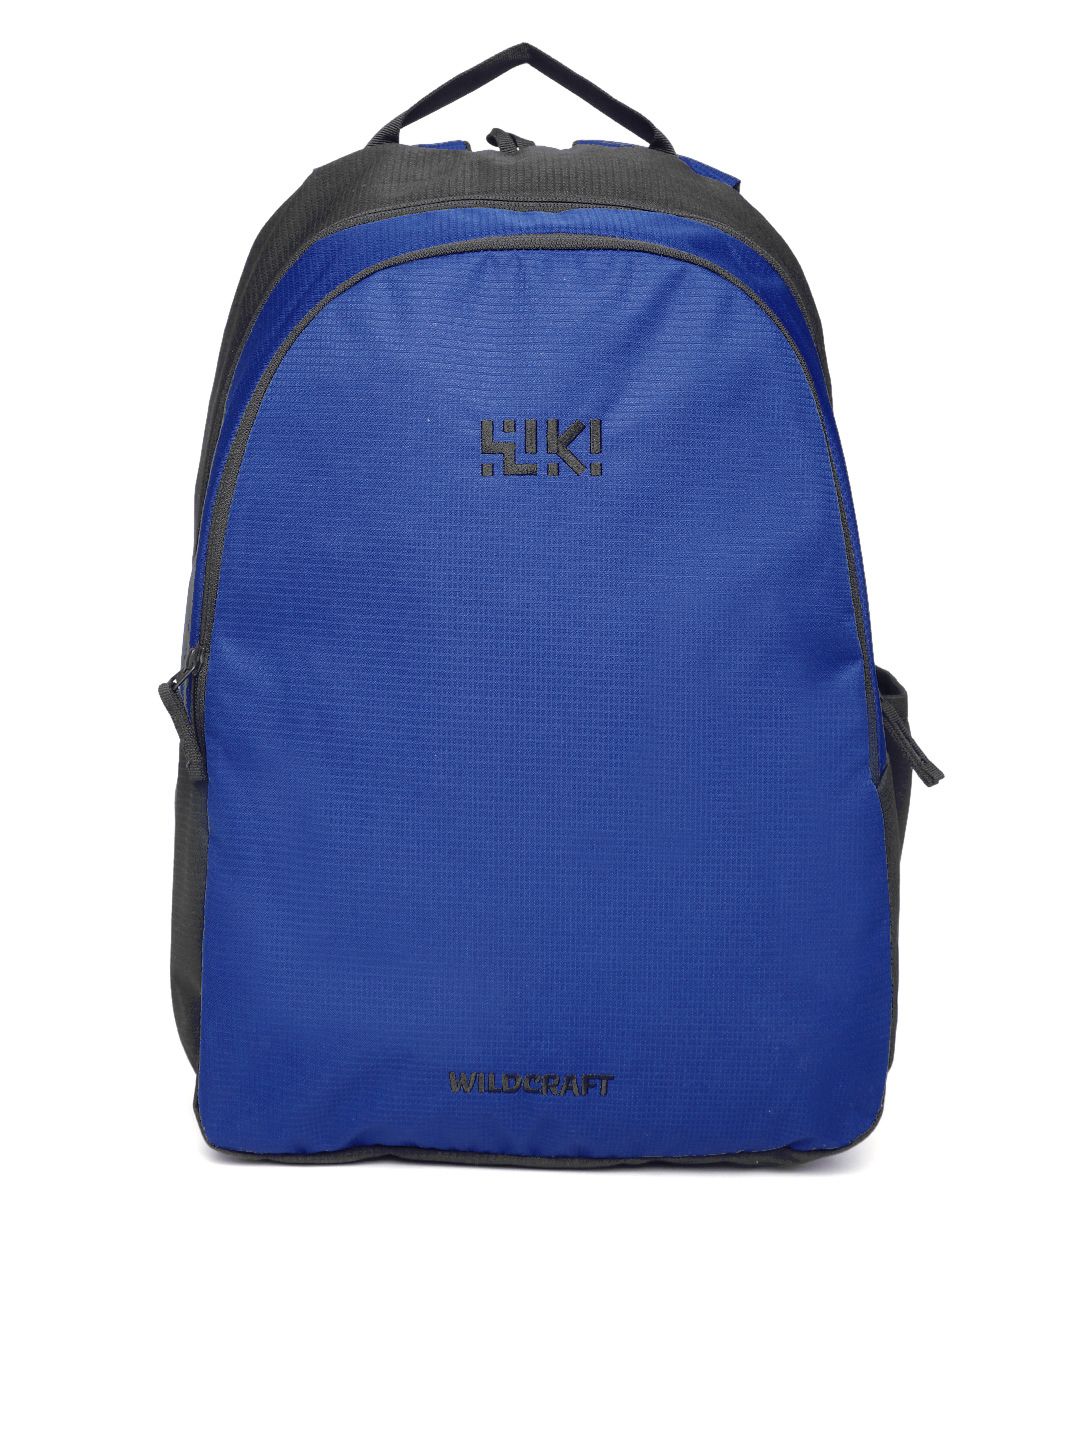 Wildcraft Unisex Blue & Black Craft 1 Solid Backpack Price in India